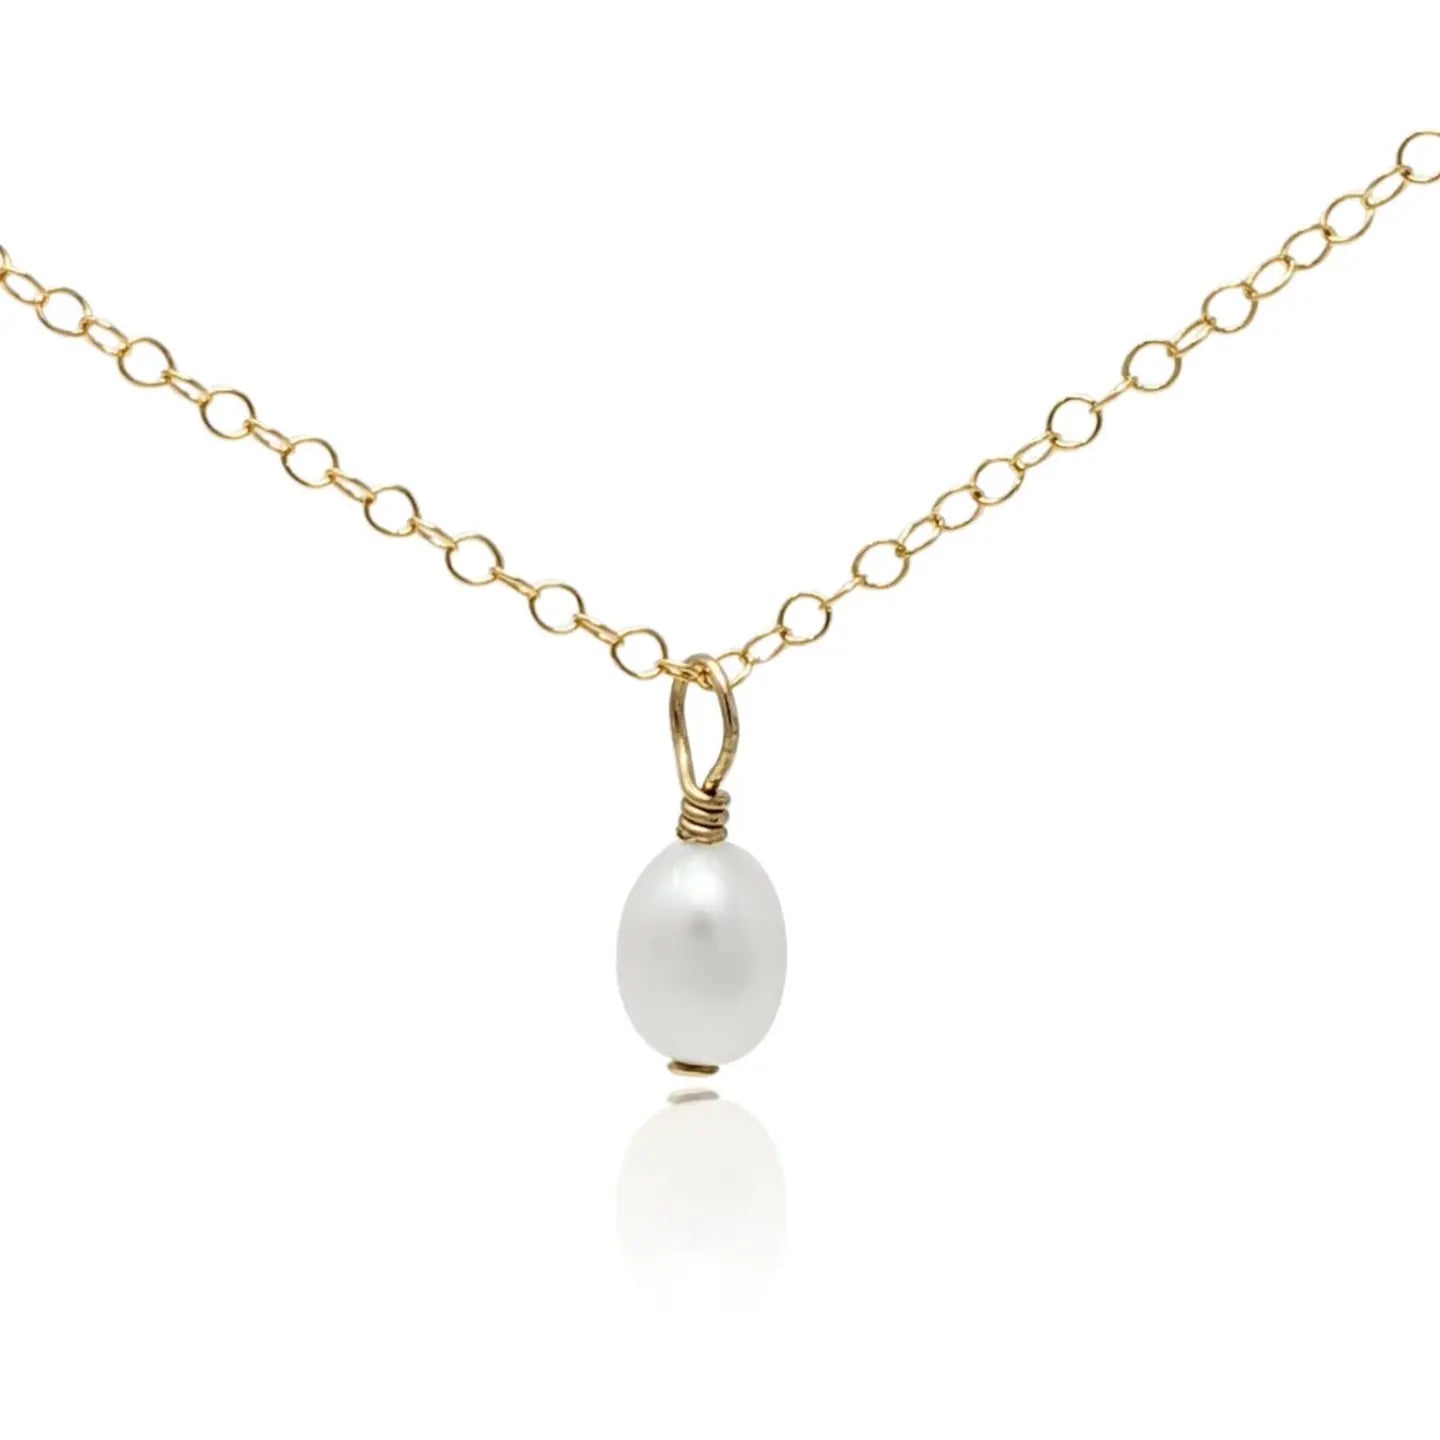 Small pearl pendant necklace with gold chain